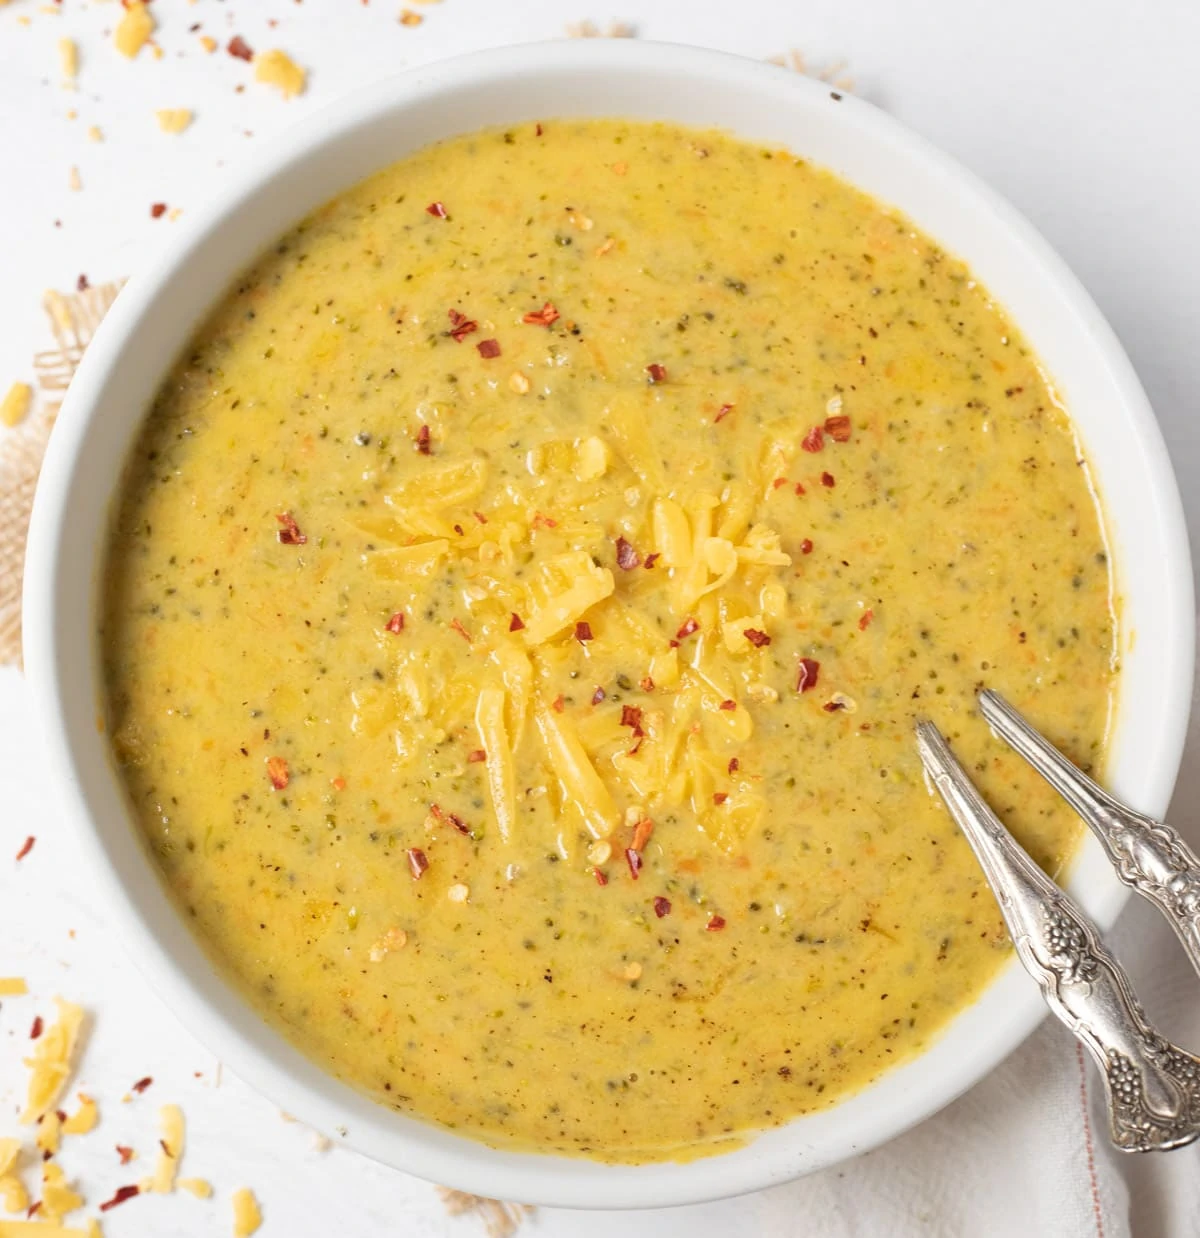 Broccoli Cheese Soup in a bowl topped with grated cheddar